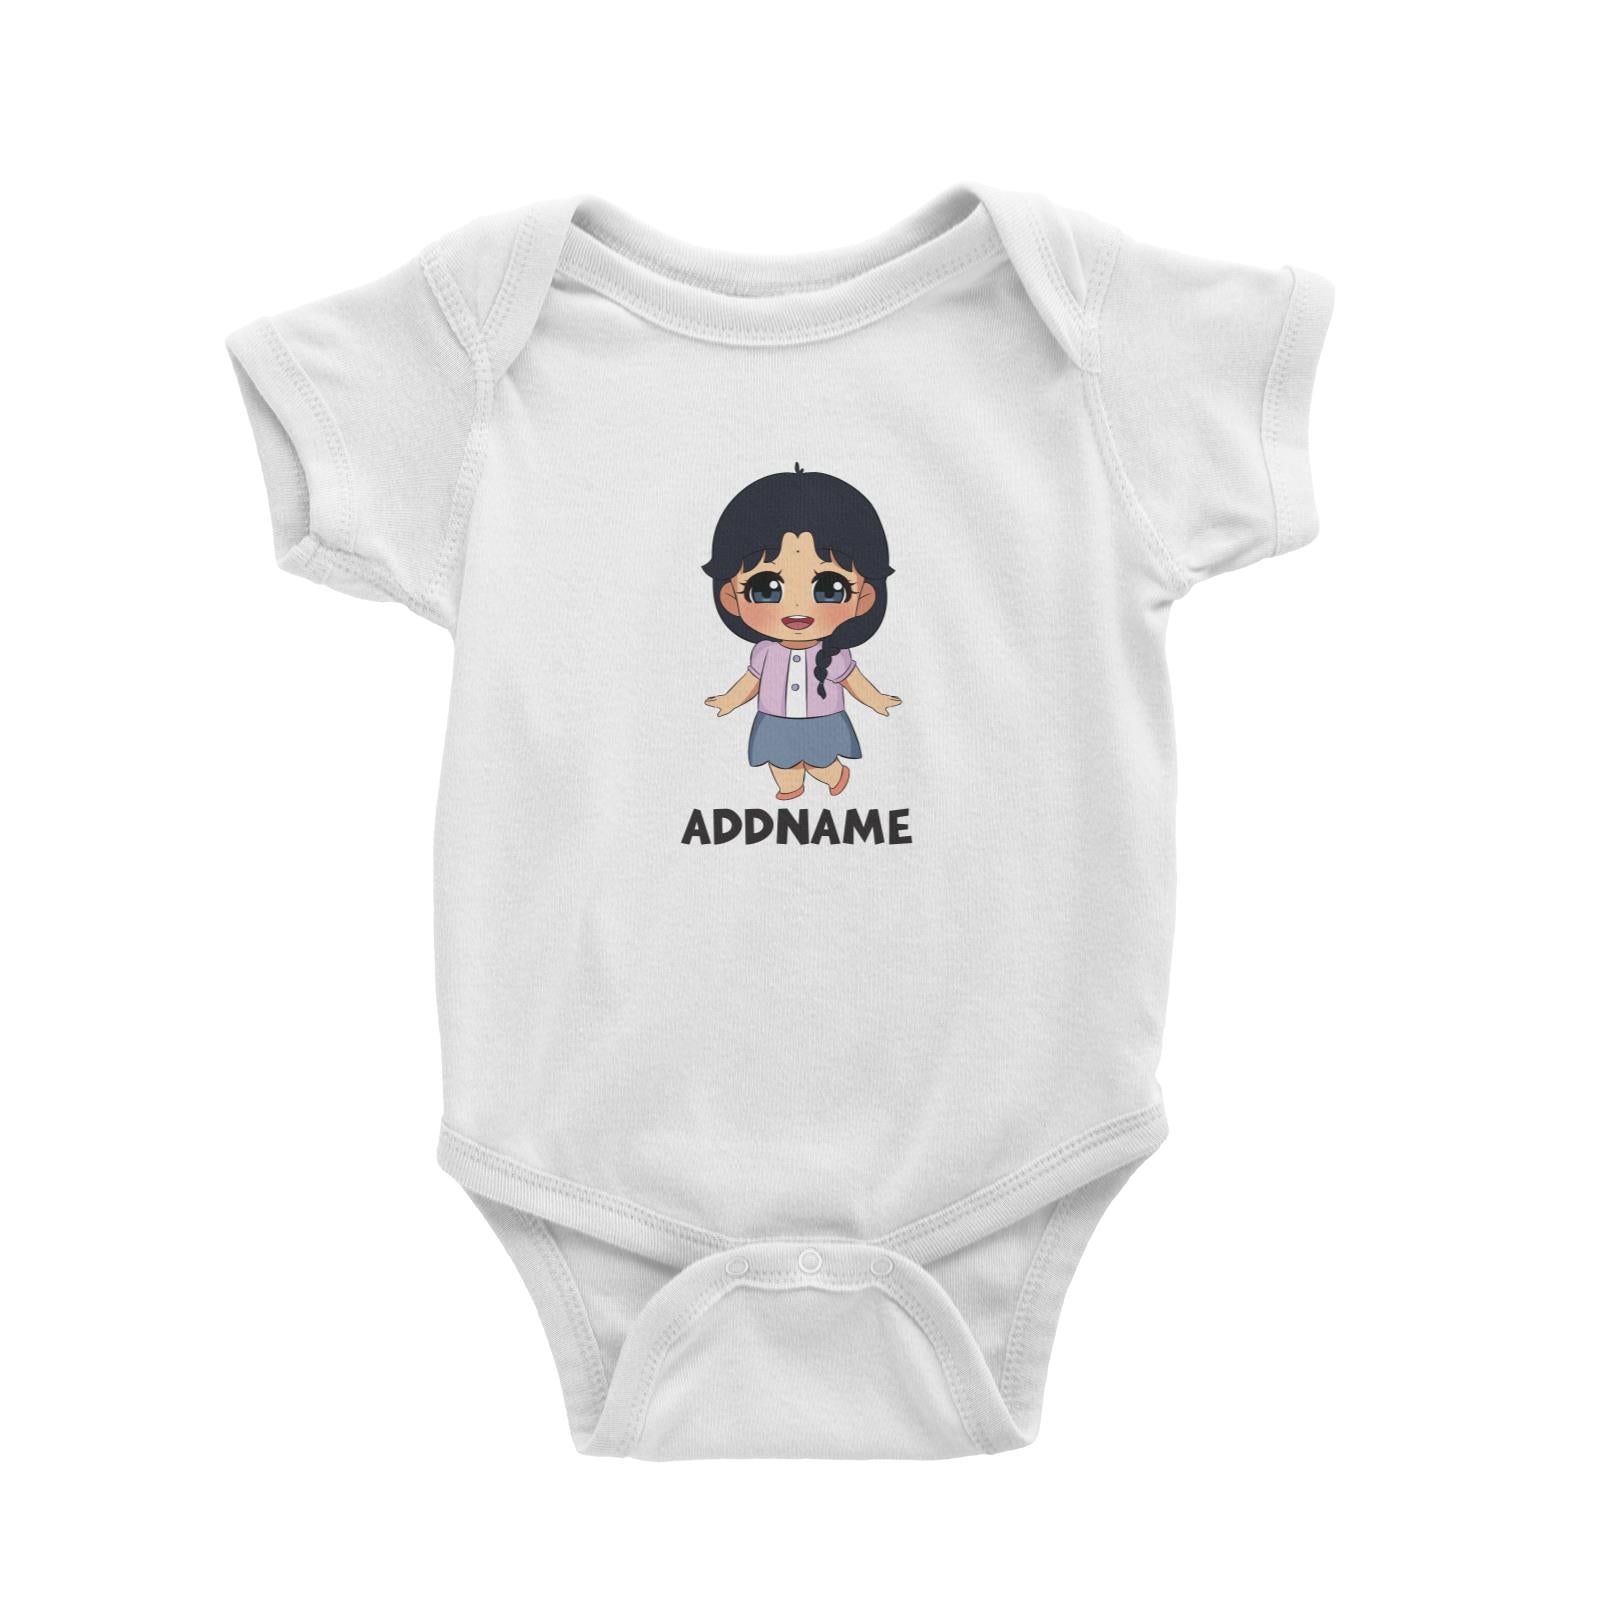 Children's Day Gift Series Little Indian Girl Addname Baby Romper